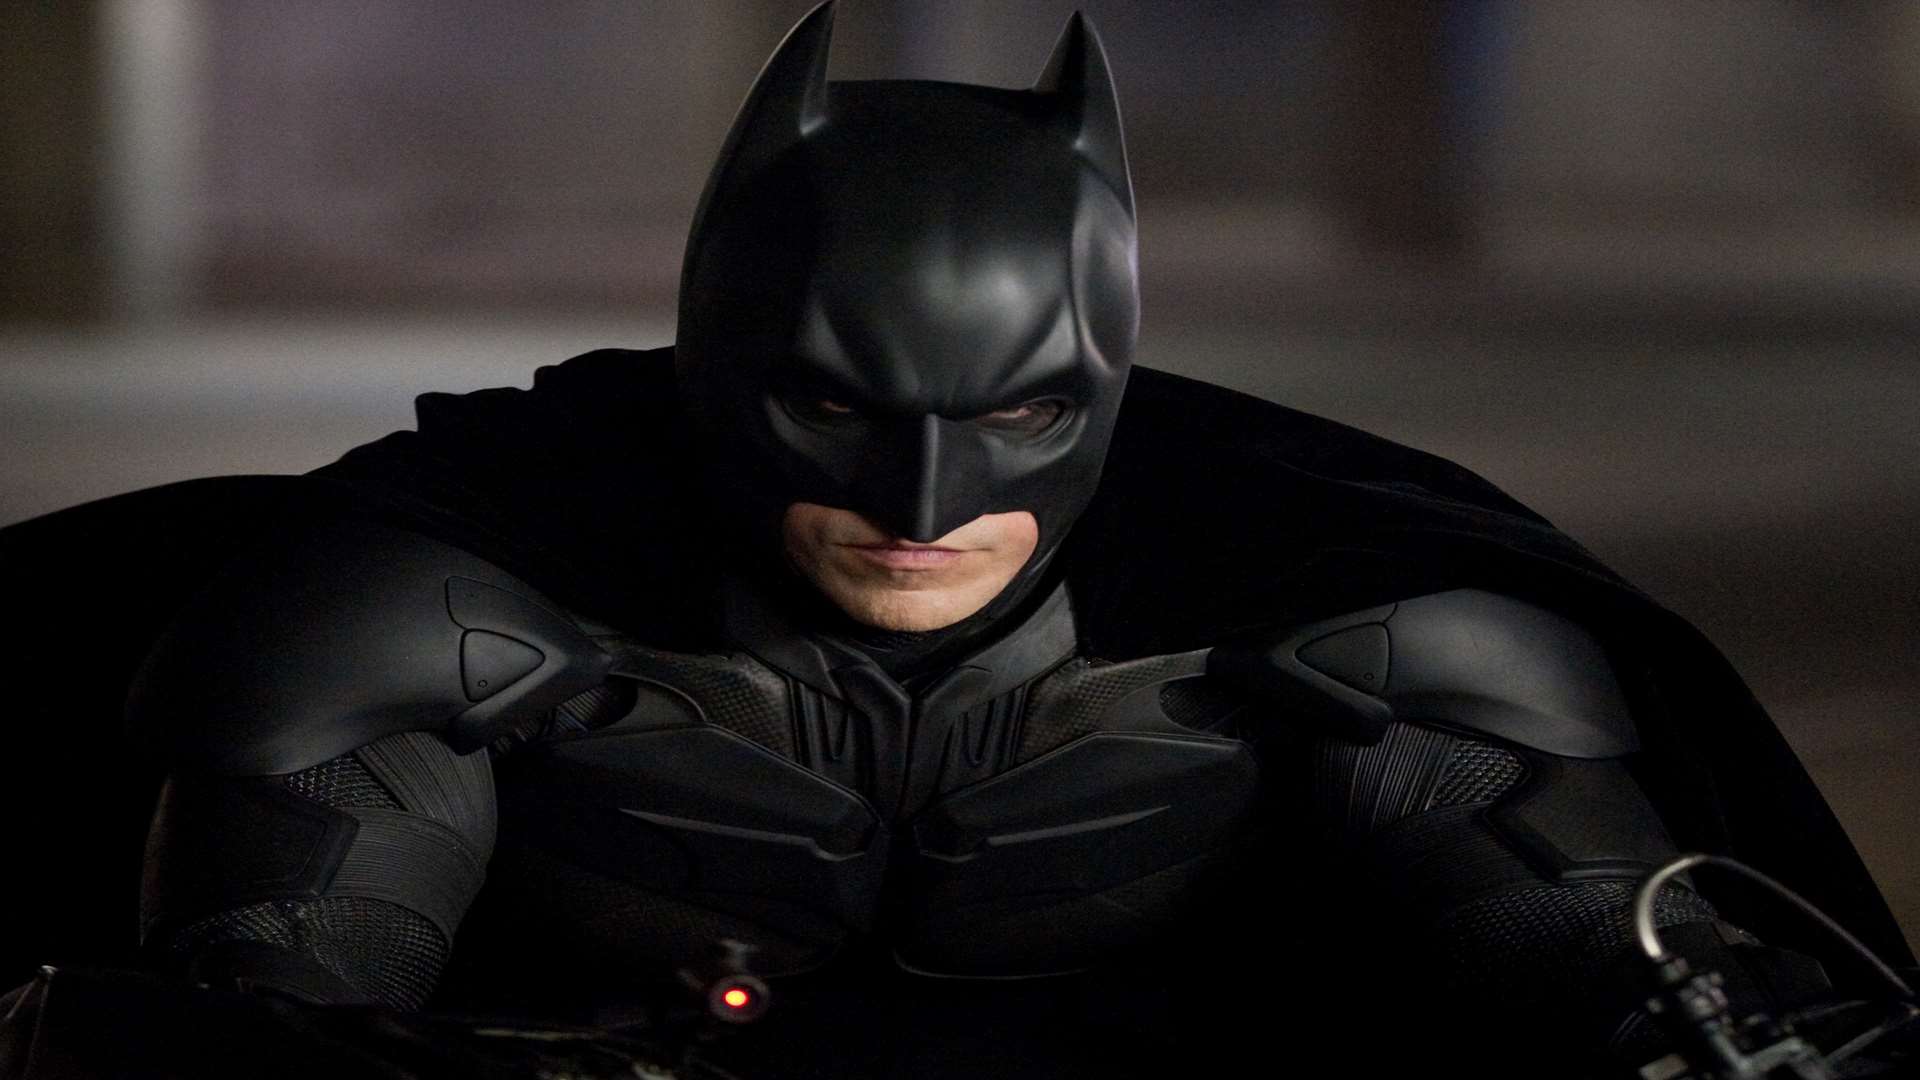 The design wouldn’t be out of place in the hit Batman films